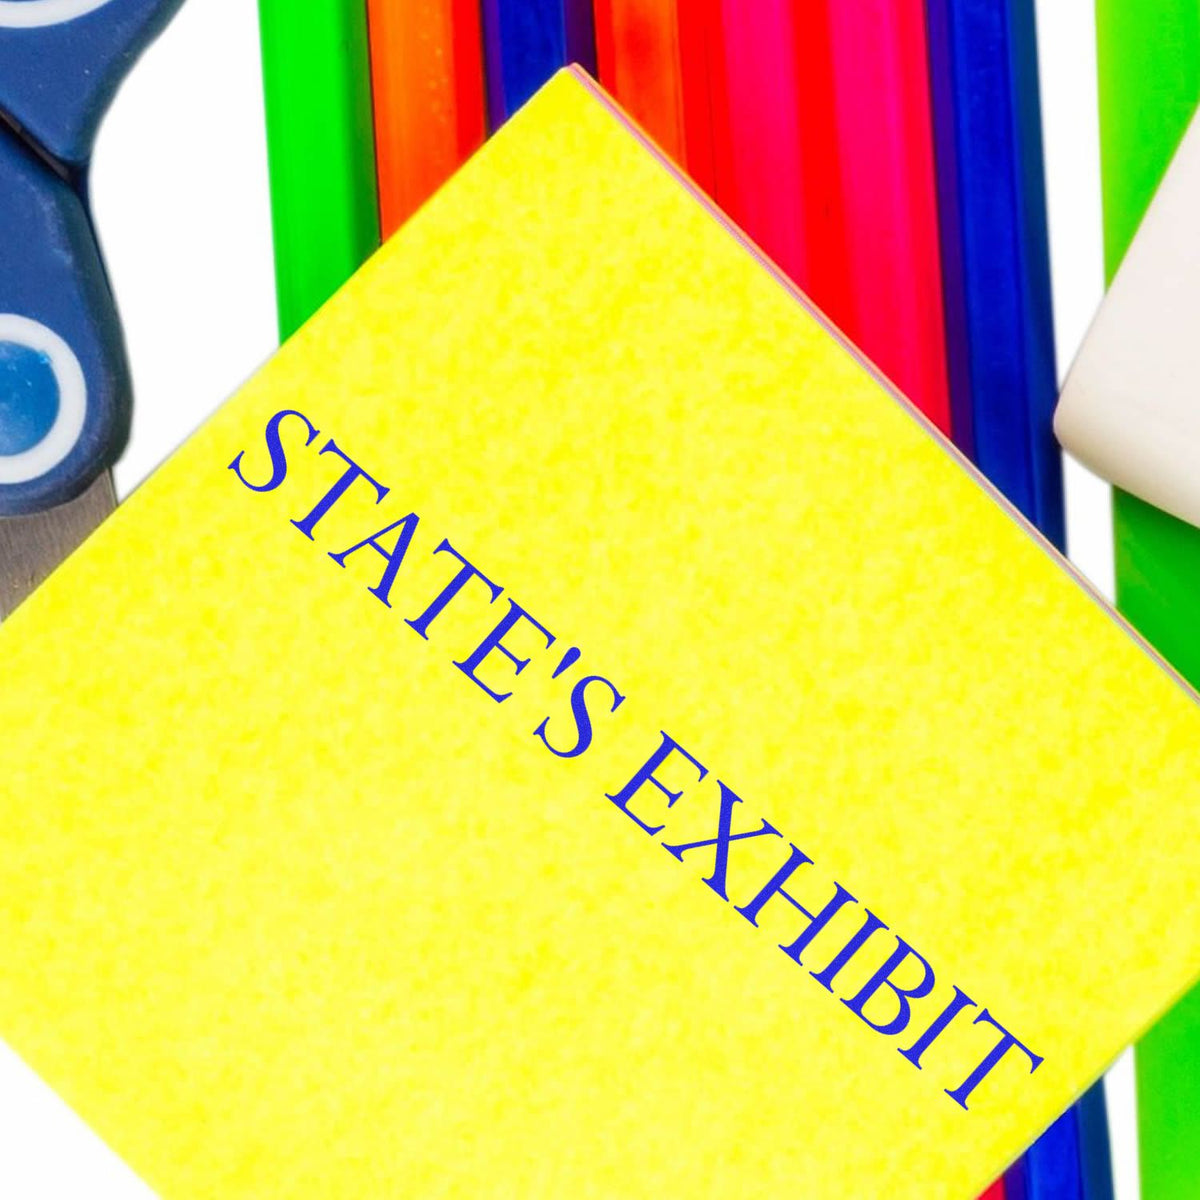 Large States Exhibit Rubber Stamp In Use Photo